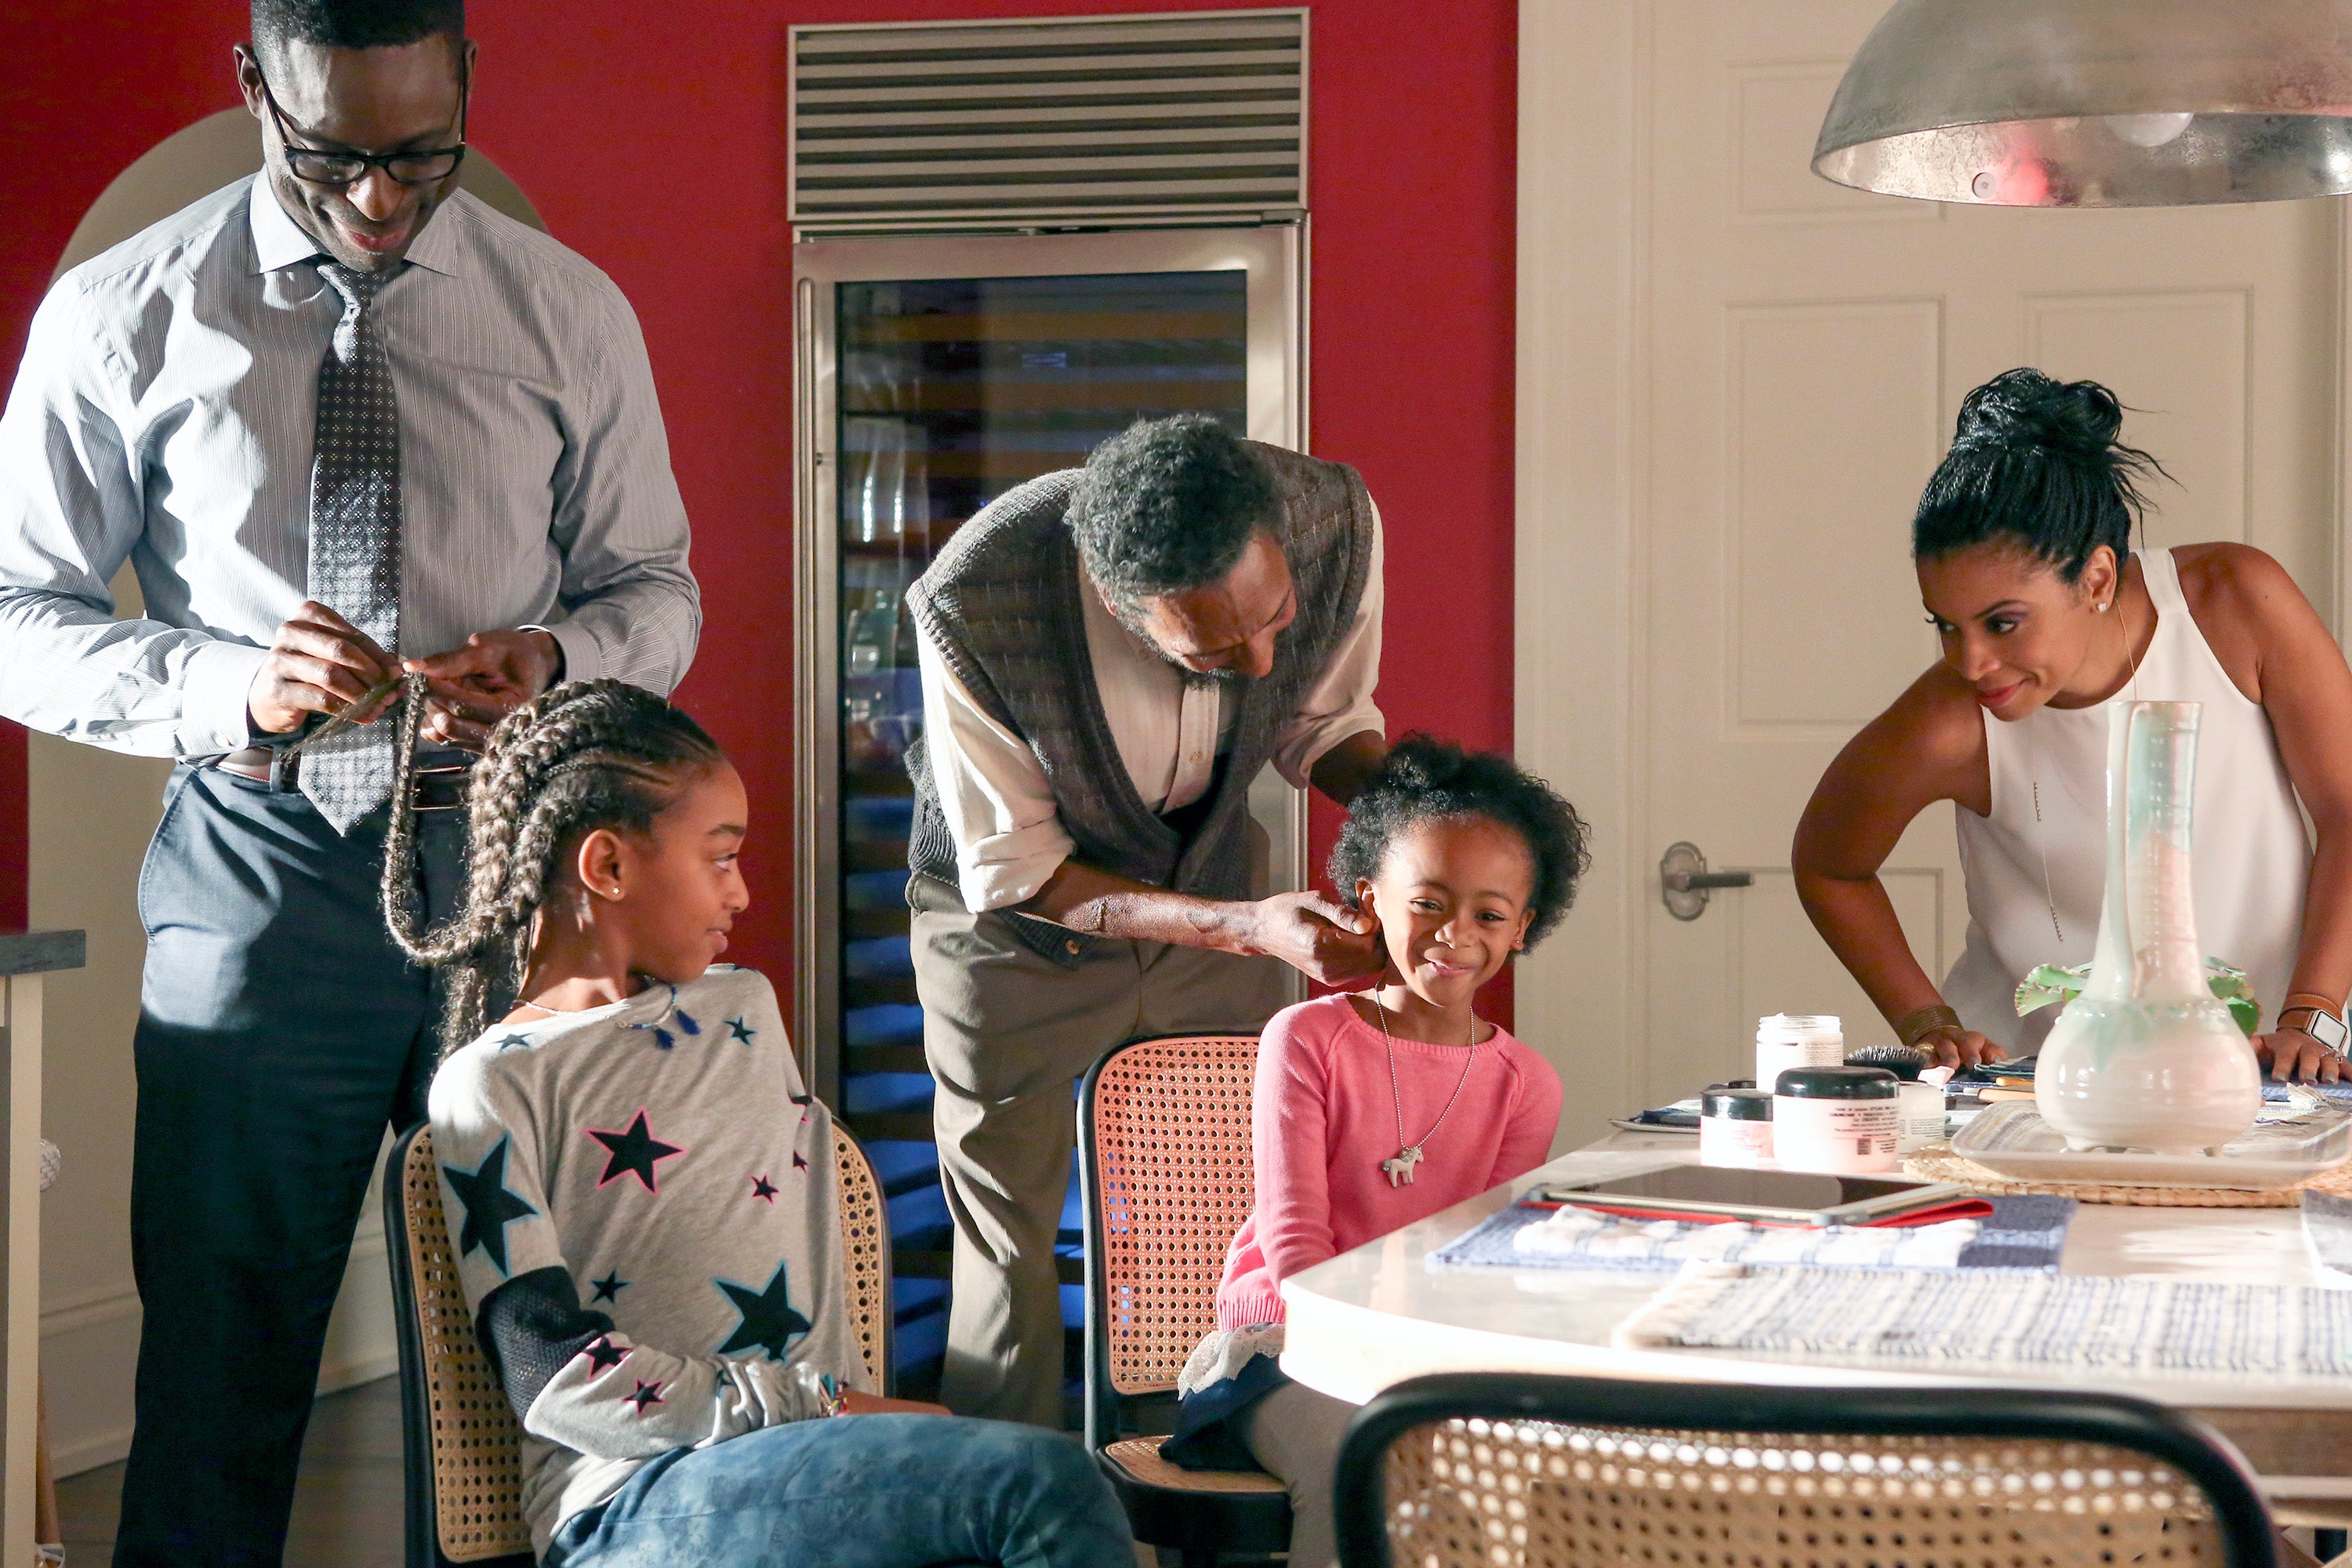 9 Valuable Love Lessons From Beth and Randall's Marriage On ‘This Is Us’
